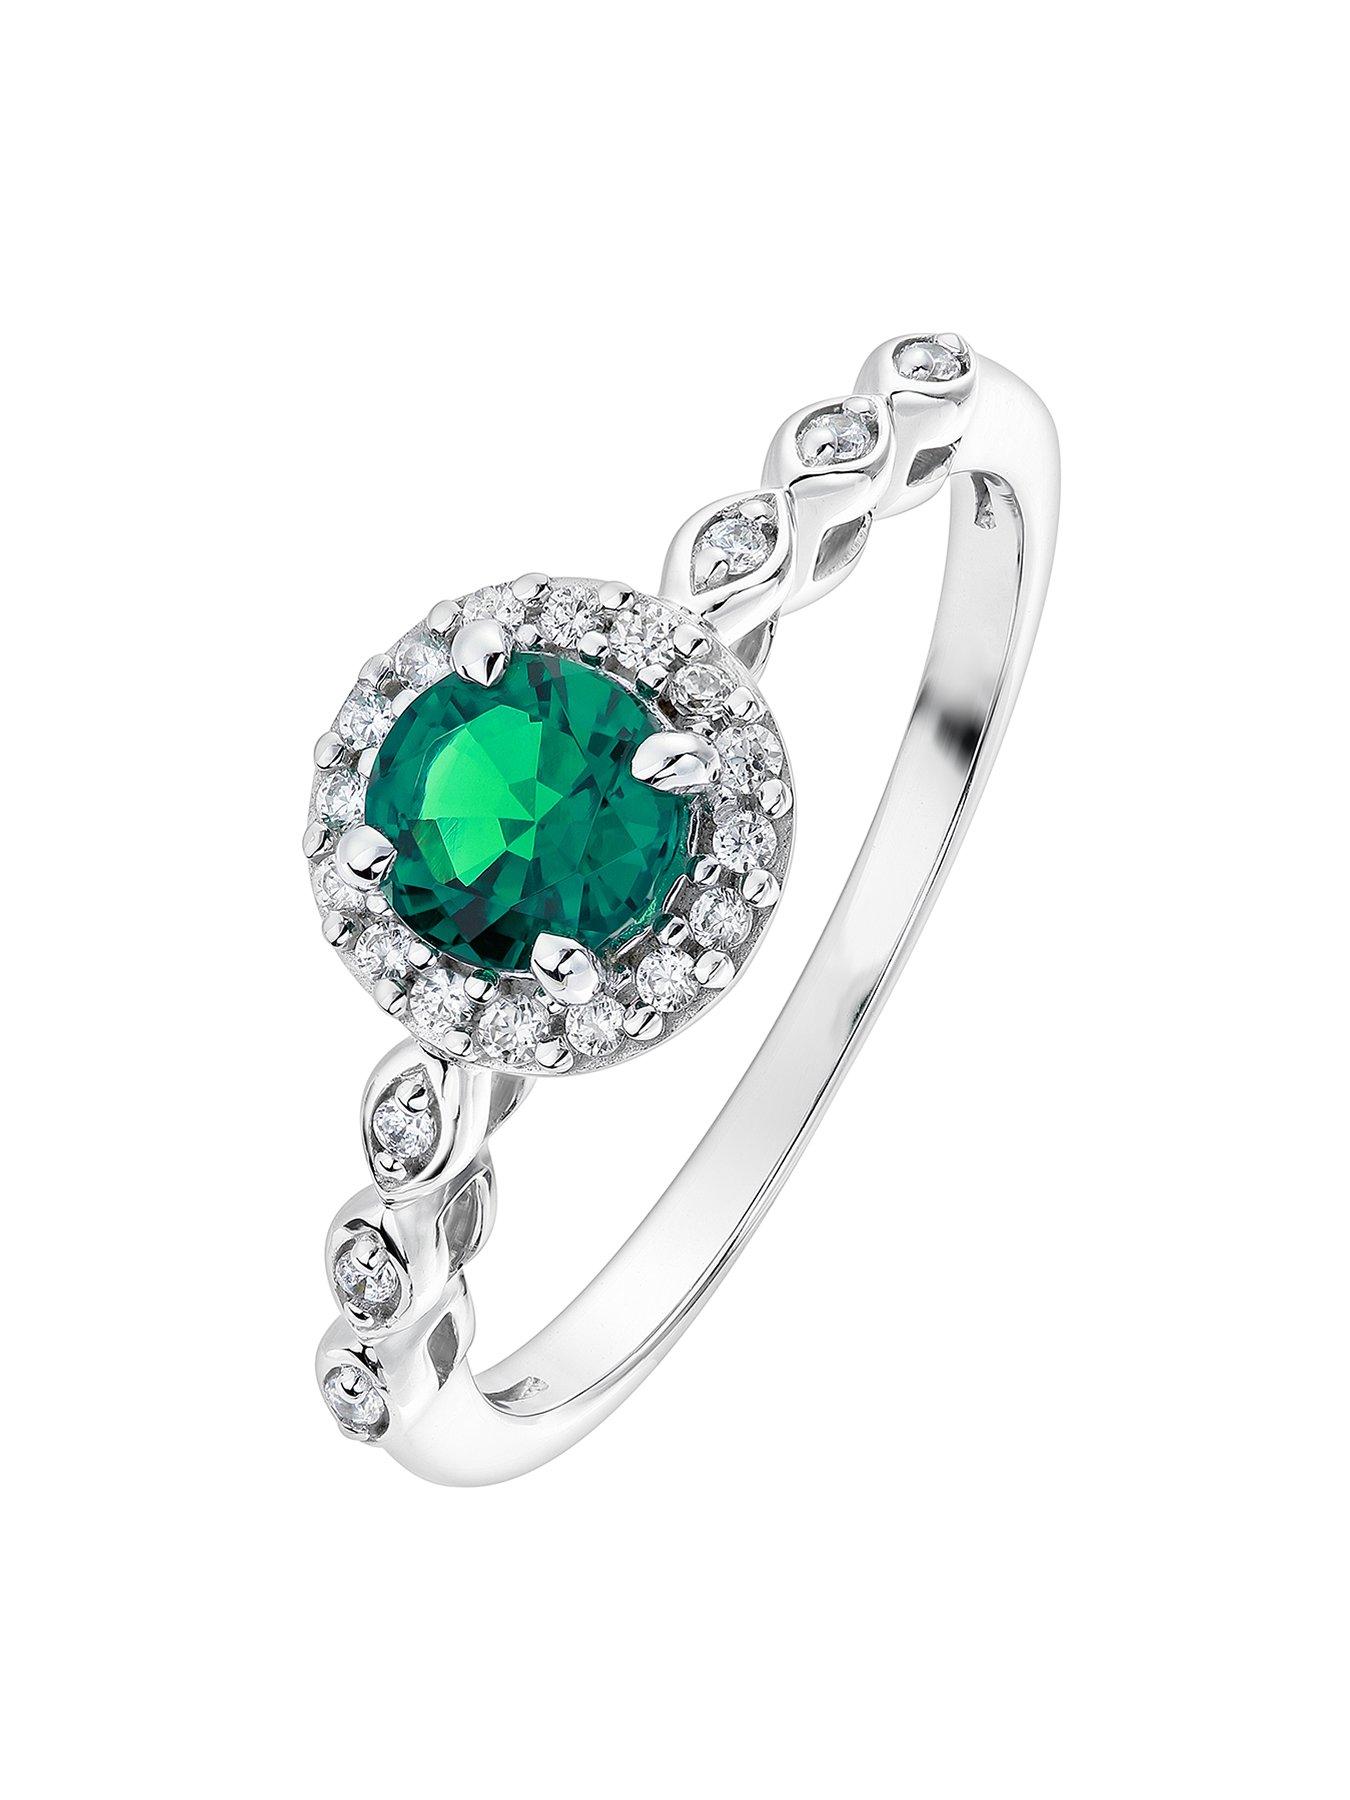  Arrosa 9ct White Gold 5mm Created Emerald and 0.10ct Diamond Ring